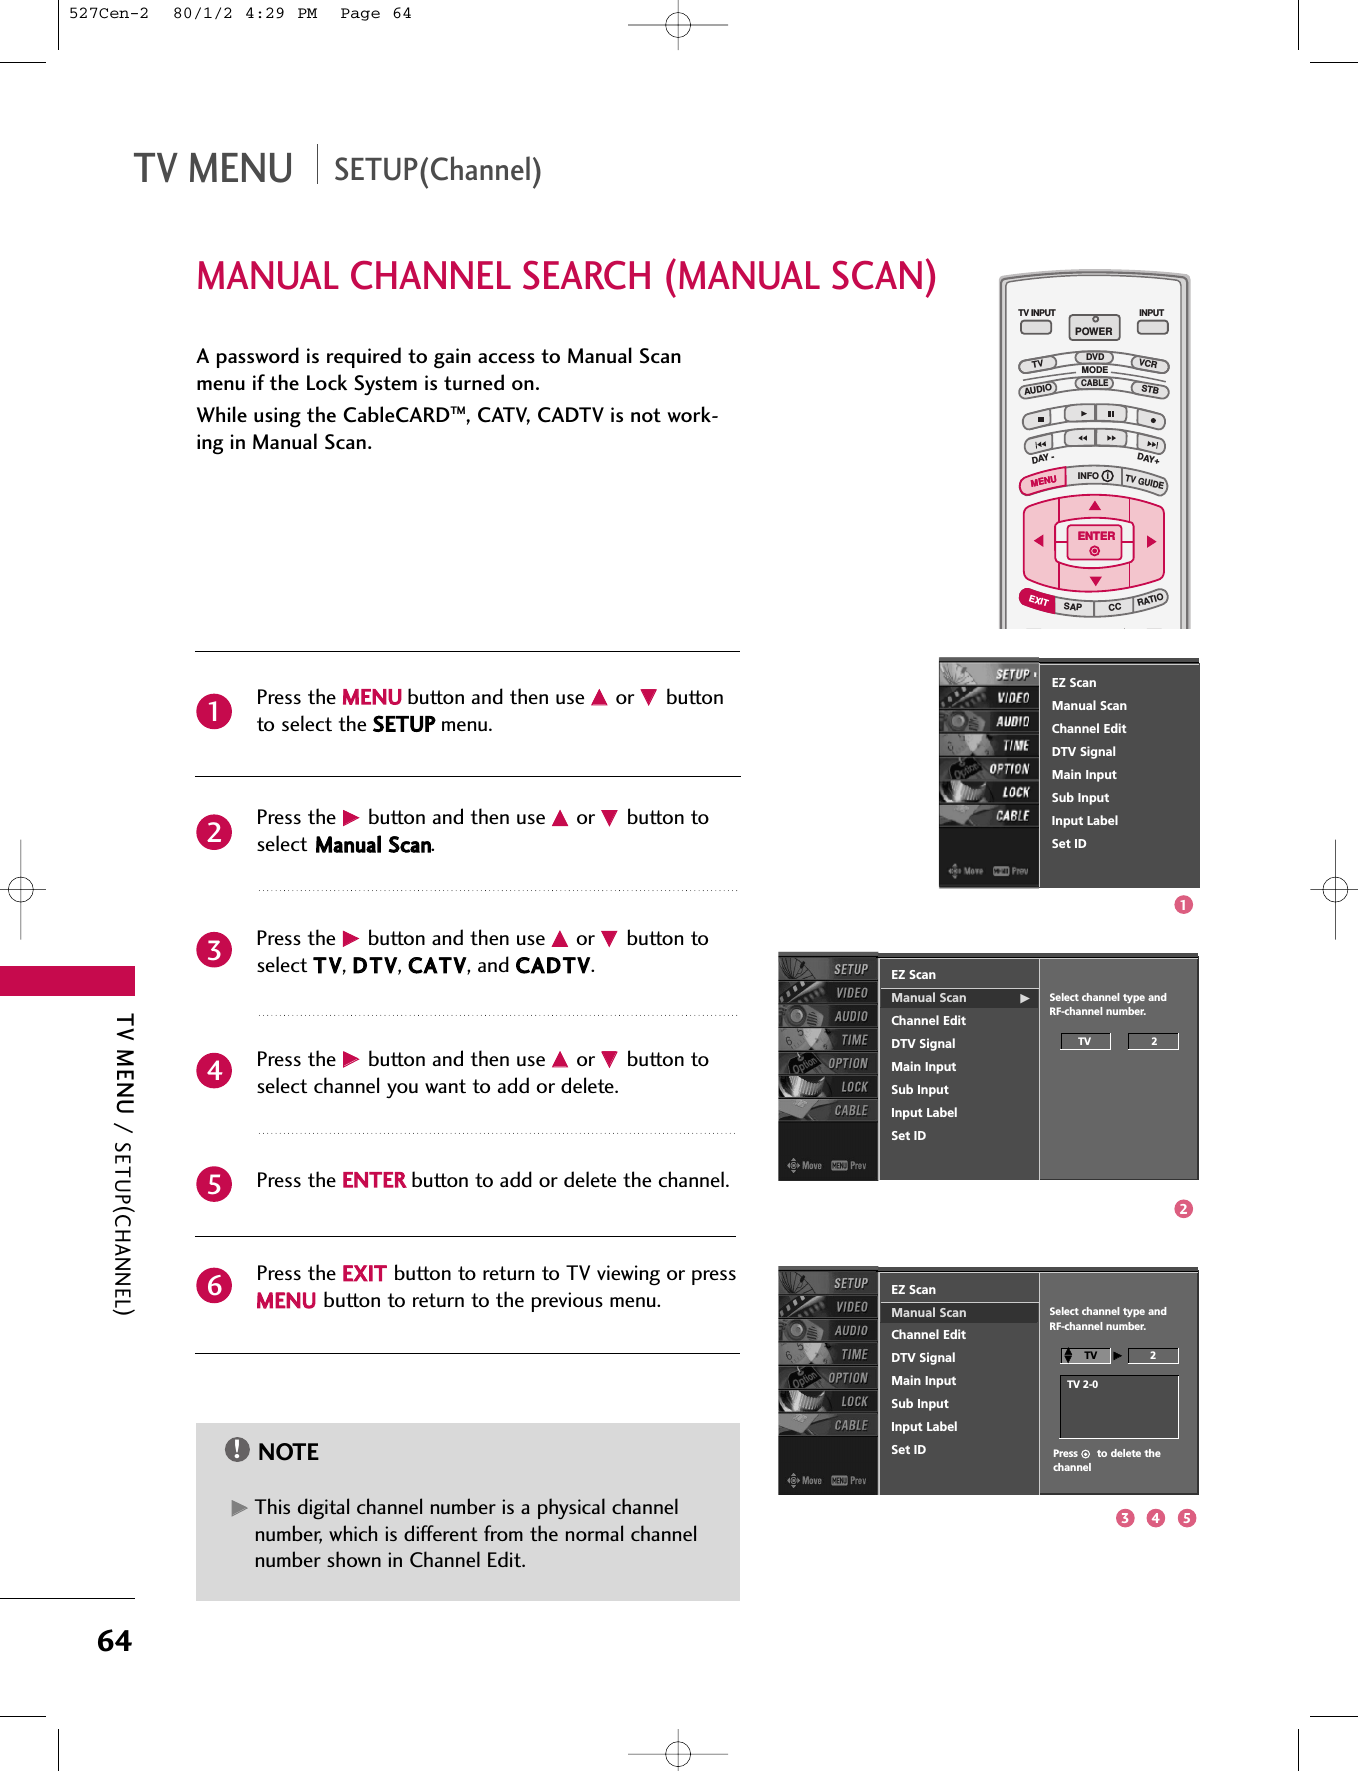 TV MENU / SETUP(CHANNEL)64MANUAL CHANNEL SEARCH (MANUAL SCAN)TV MENU SETUP(Channel)A password is required to gain access to Manual Scanmenu if the Lock System is turned on.While using the CableCARDTM, CATV, CADTV is not work-ing in Manual Scan.Press the MMEENNUUbutton and then use DD  or EE  buttonto select the SSEETTUUPPmenu.Press the GG  button and then use DD  or EE  button toselect MMaannuuaall  SSccaann.Press the GG  button and then use DD  or EE  button toselect TTVV, DDTTVV, CCAATTVV, and CCAADDTTVV.Press the GG  button and then use DD  or EE  button toselect channel you want to add or delete.Press the EENNTTEERRbutton to add or delete the channel.Press the EEXXIITTbutton to return to TV viewing or pressMMEENNUUbutton to return to the previous menu.INFO   iTV GUIDEENTERENTERSAPCCRATIOPOWERDAY -DAY+VCRTVDVDAUDIOCABLESTBMODETV INPUT INPUTMENUMENUEXITNOTE!GGThis digital channel number is a physical channelnumber, which is different from the normal channelnumber shown in Channel Edit.EZ ScanManual Scan GChannel EditDTV SignalMain InputSub InputInput LabelSet IDSelect channel type and RF-channel number.TV                   2EZ ScanManual ScanChannel EditDTV SignalMain InputSub InputInput LabelSet IDEZ ScanManual ScanChannel EditDTV SignalMain InputSub InputInput LabelSet ID214365Select channel type and RF-channel number.TV  GG2Press      to delete thechannelTV 2-0DDEE123 4 5527Cen-2  80/1/2 4:29 PM  Page 64